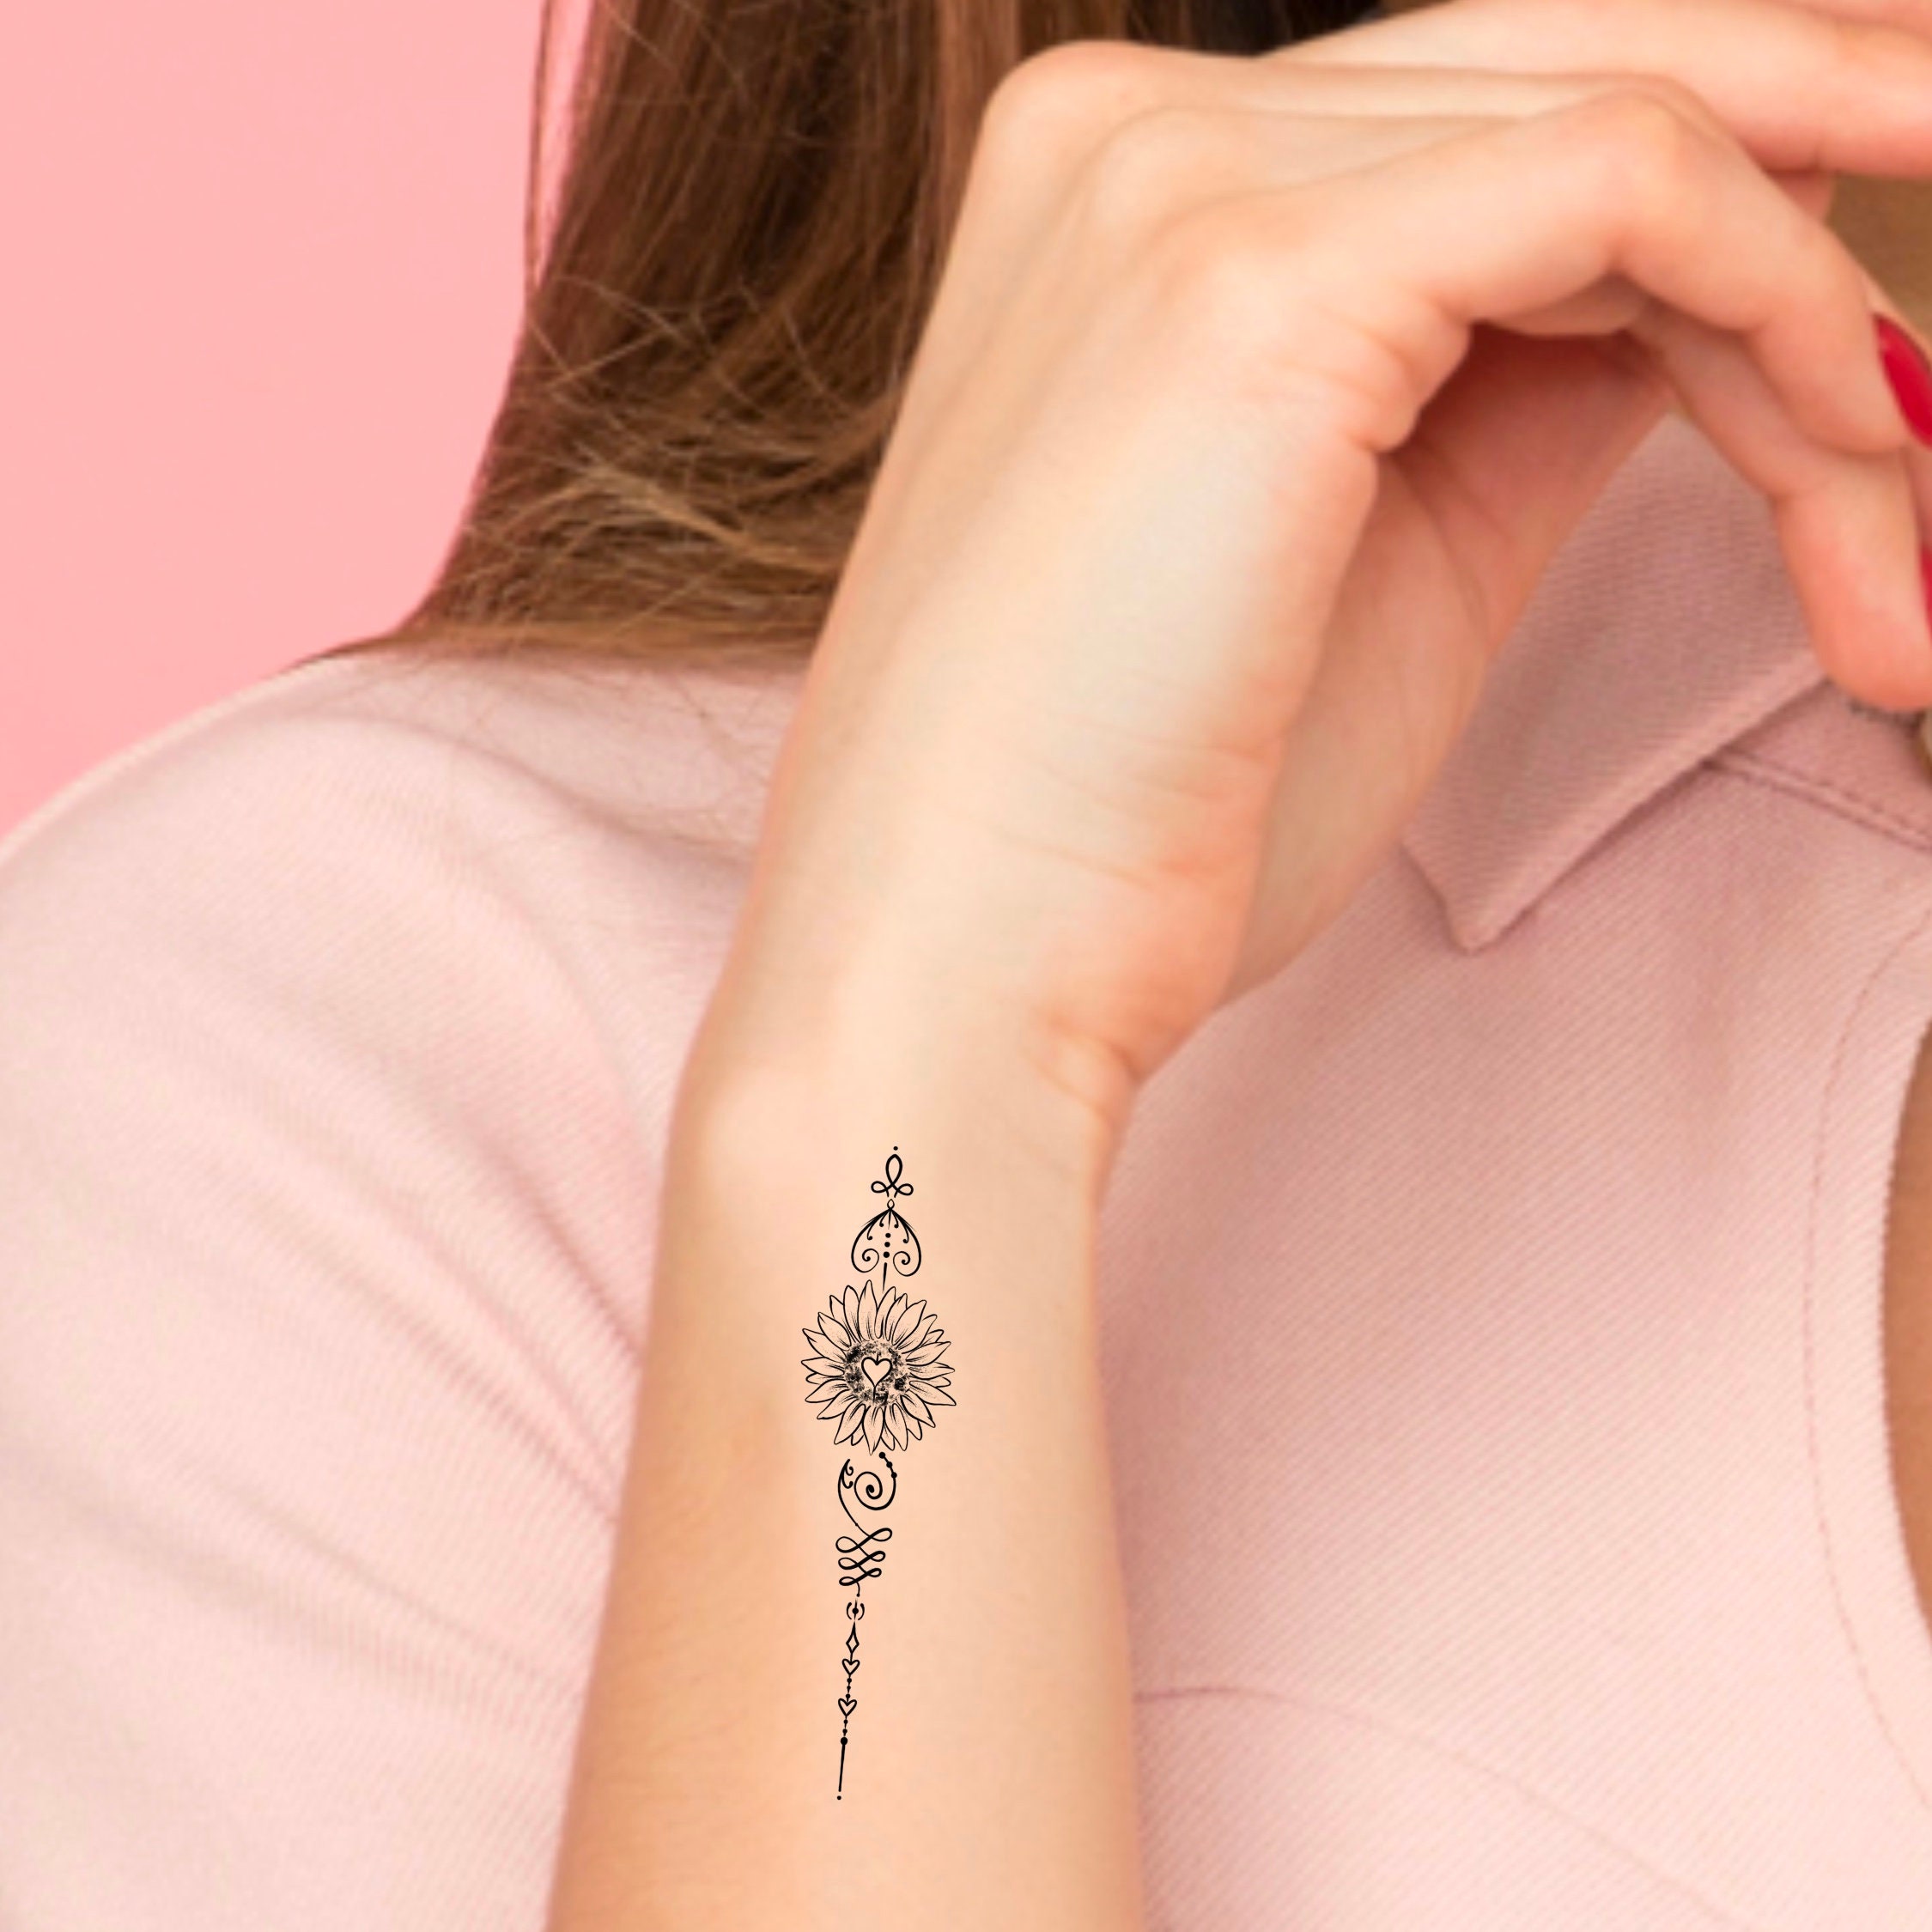 101 Best Bts Love Yourself Tattoo Ideas That Will Blow Your Mind!